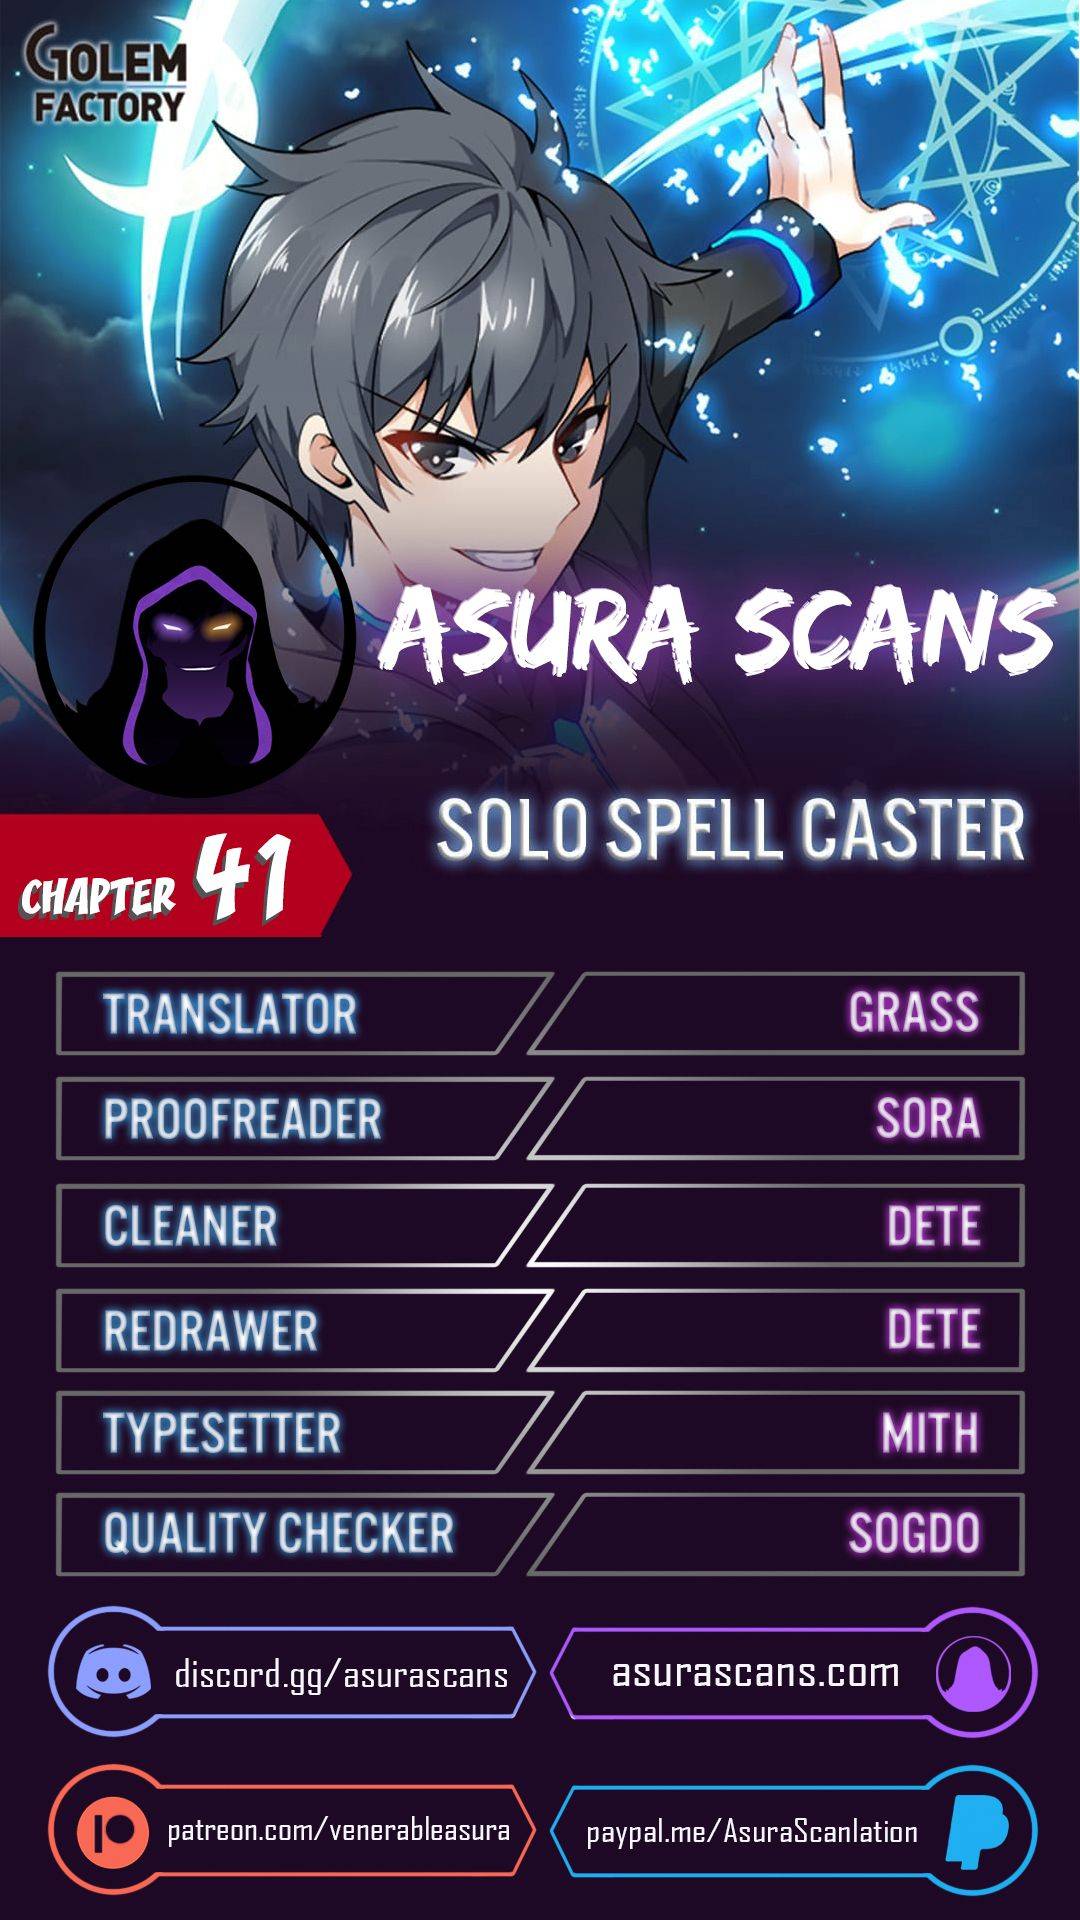 Solo Spell Caster - Chapter 41 Page 1